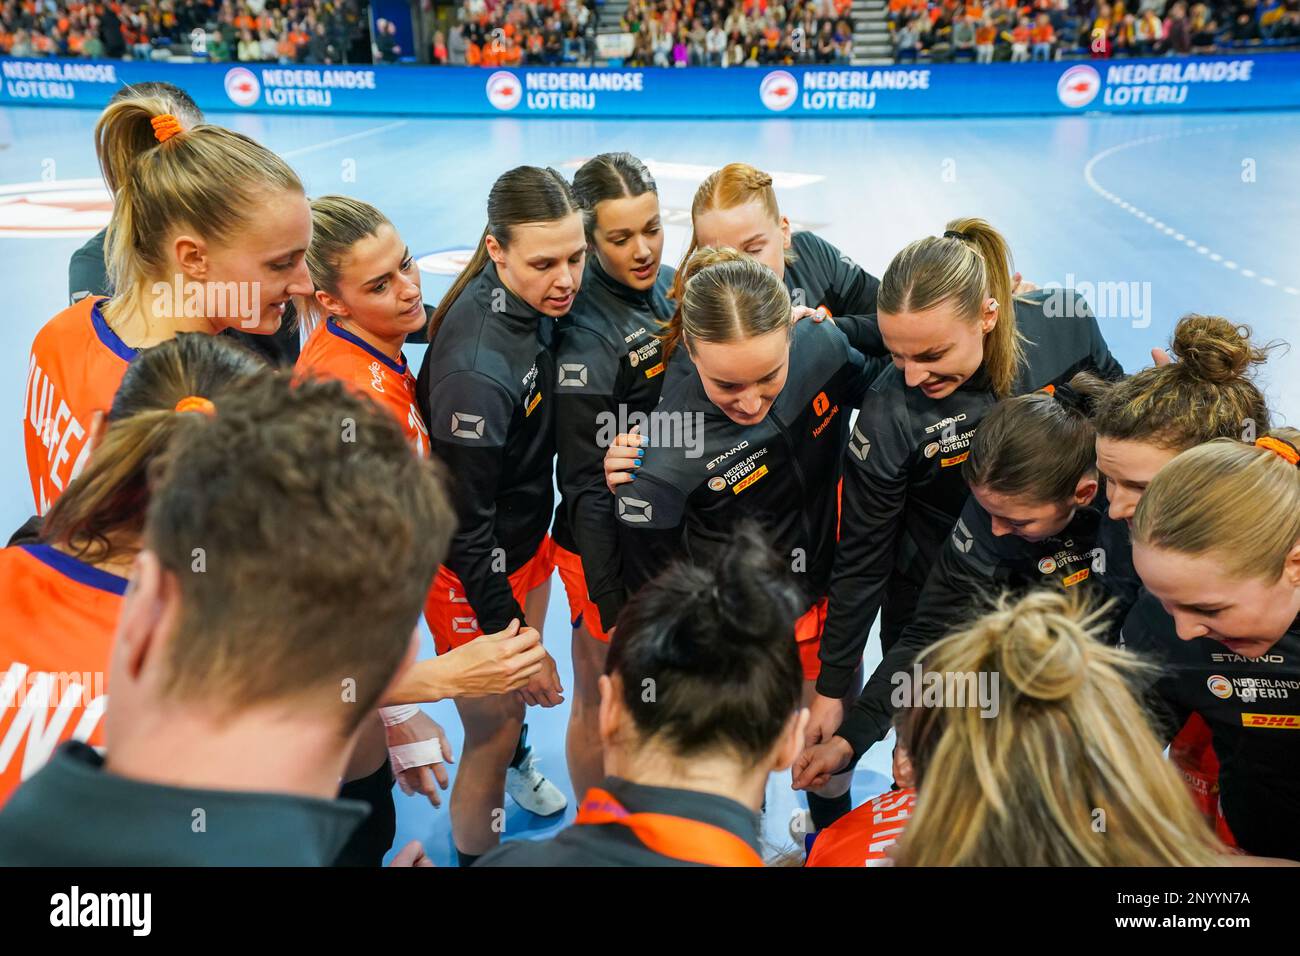 EINDHOVEN, NETHERLANDS - MARCH 2: Team Netherlands with Claudia Rompen of the Netherlands, Laura van der Heijden of the Netherlands, Debbie Bont of the Netherlands, Lois Abbingh of The Netherlands, Pipy Wolfs of the Netherlands, Bo van Wetering of the Netherlands, Kim Molenaar of the Netherlands, Kelly Dulfer of the Netherlands, Merel, Freriks of the Netherlands, Inger Smits of the Netherlands, Zoe Sprengers of the Netherlands, Angela Malestein of the Netherlands, Nikita van der Vliet of the Netherlands, Rinka Duijndam of the Netherlands, Kelly Vollebregt of the Netherlands, Yara ten Holte of Stock Photo